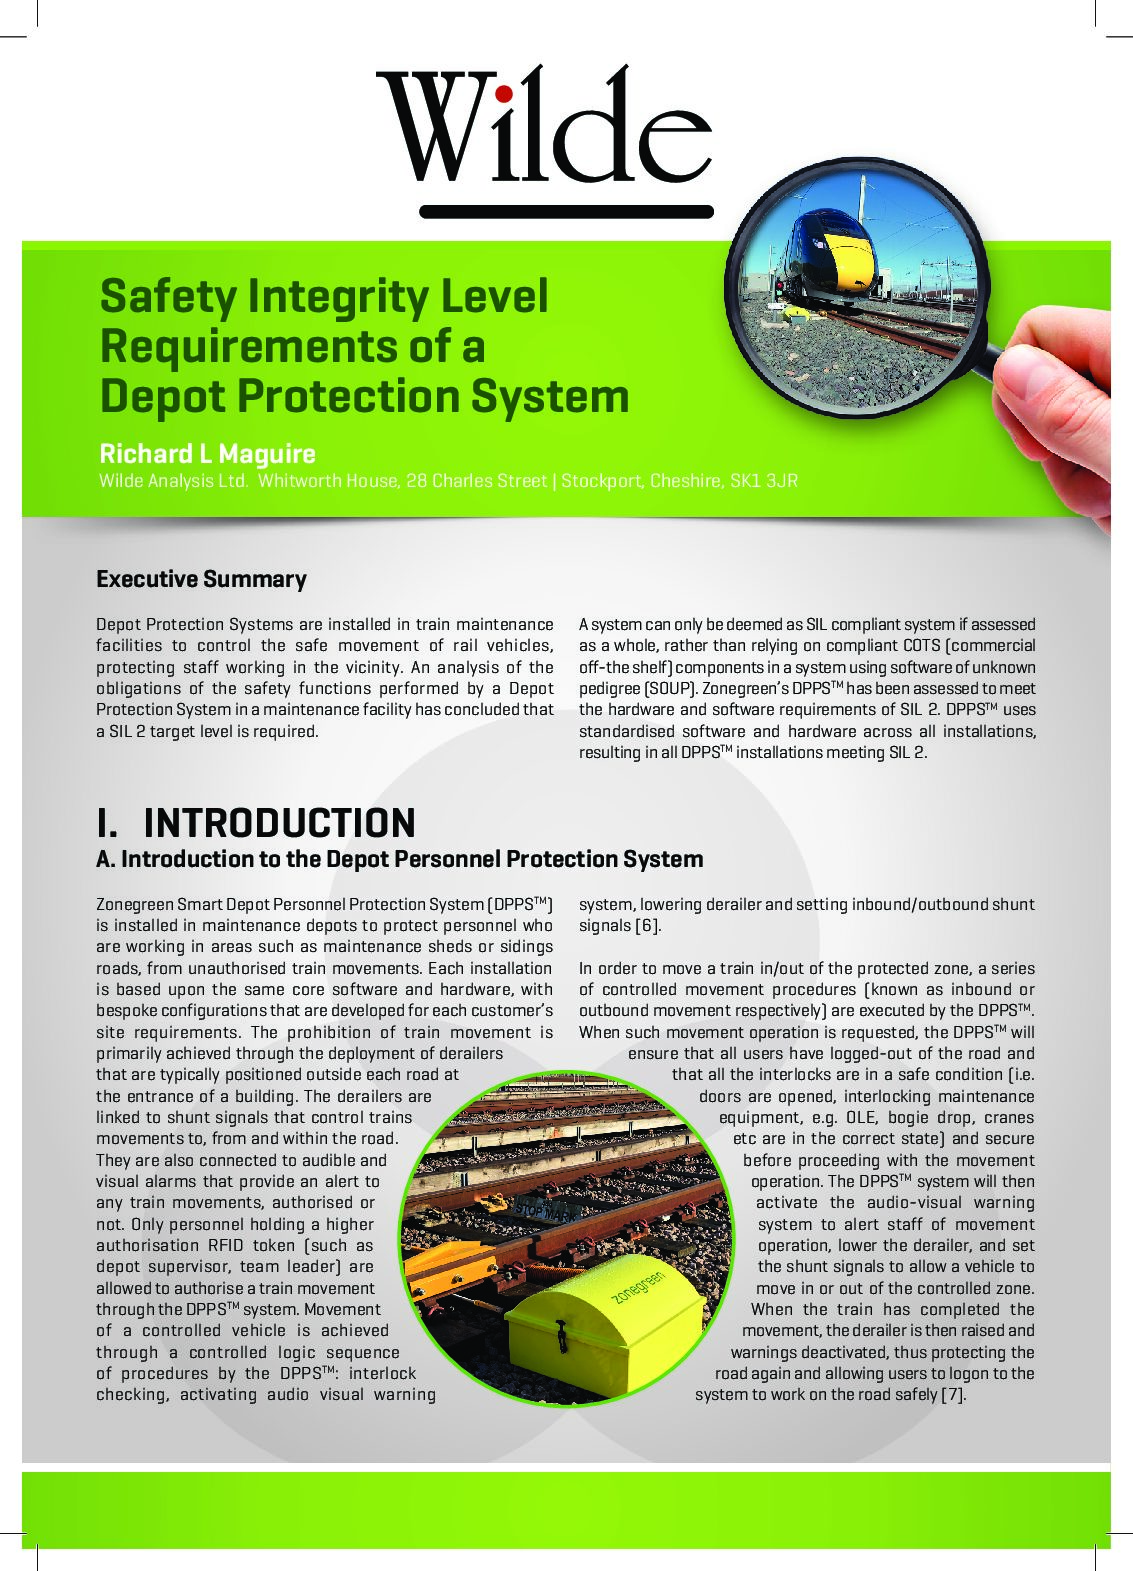 Safety Integrity Level Requirements of a Depot Protection System